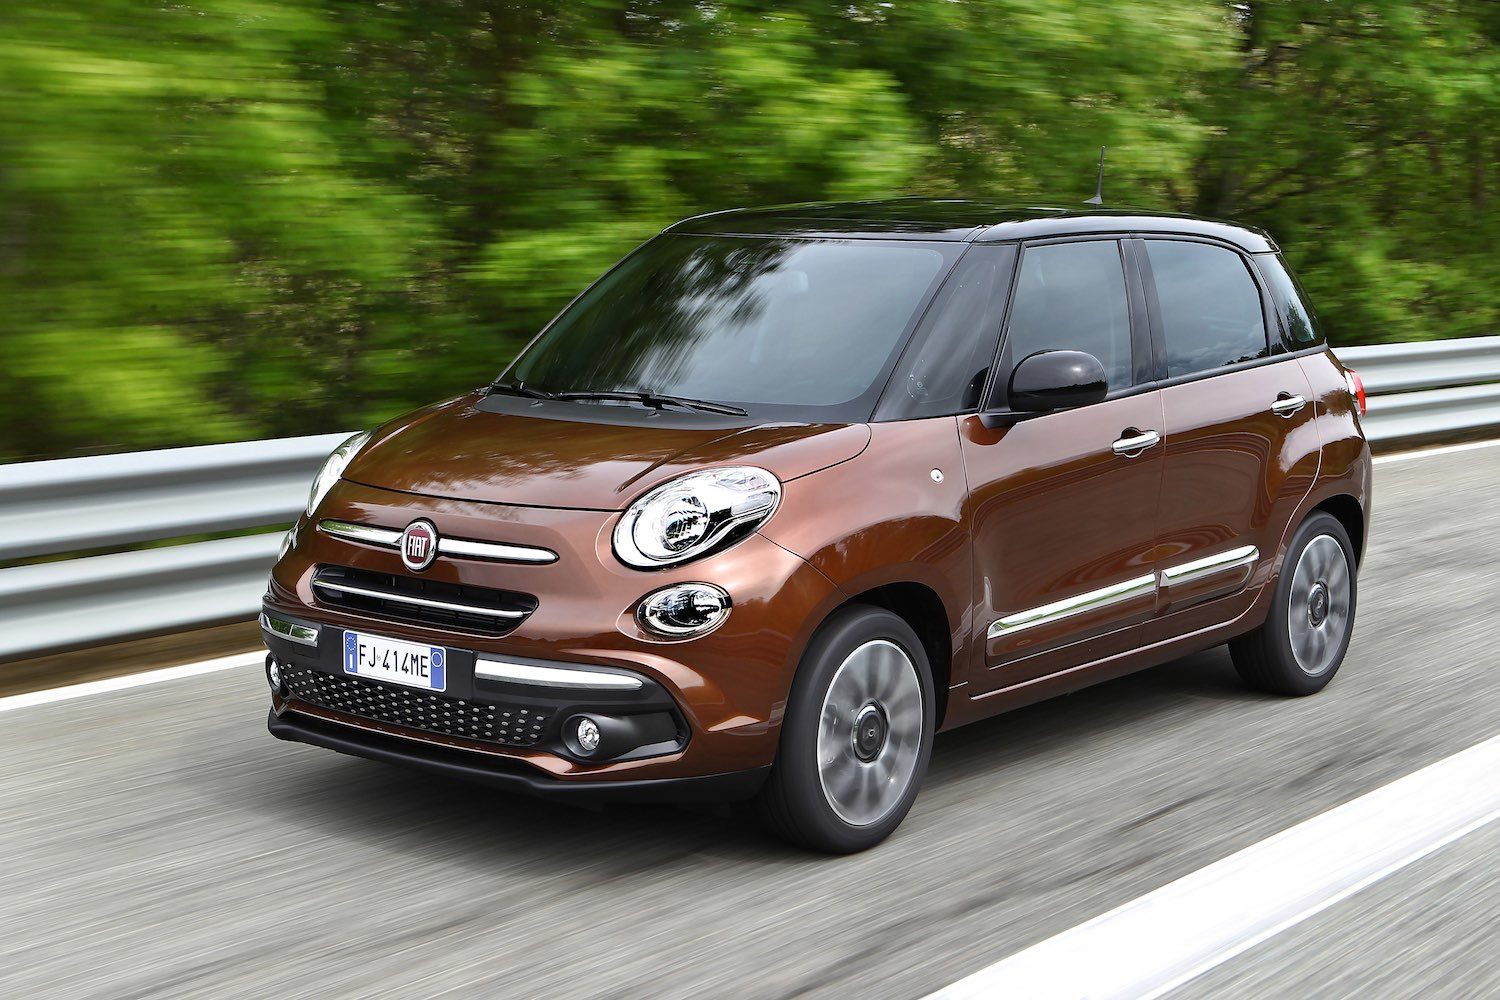 Tim Barnes-Clay reviews the New Fiat 500L from the first drive in Italy 20